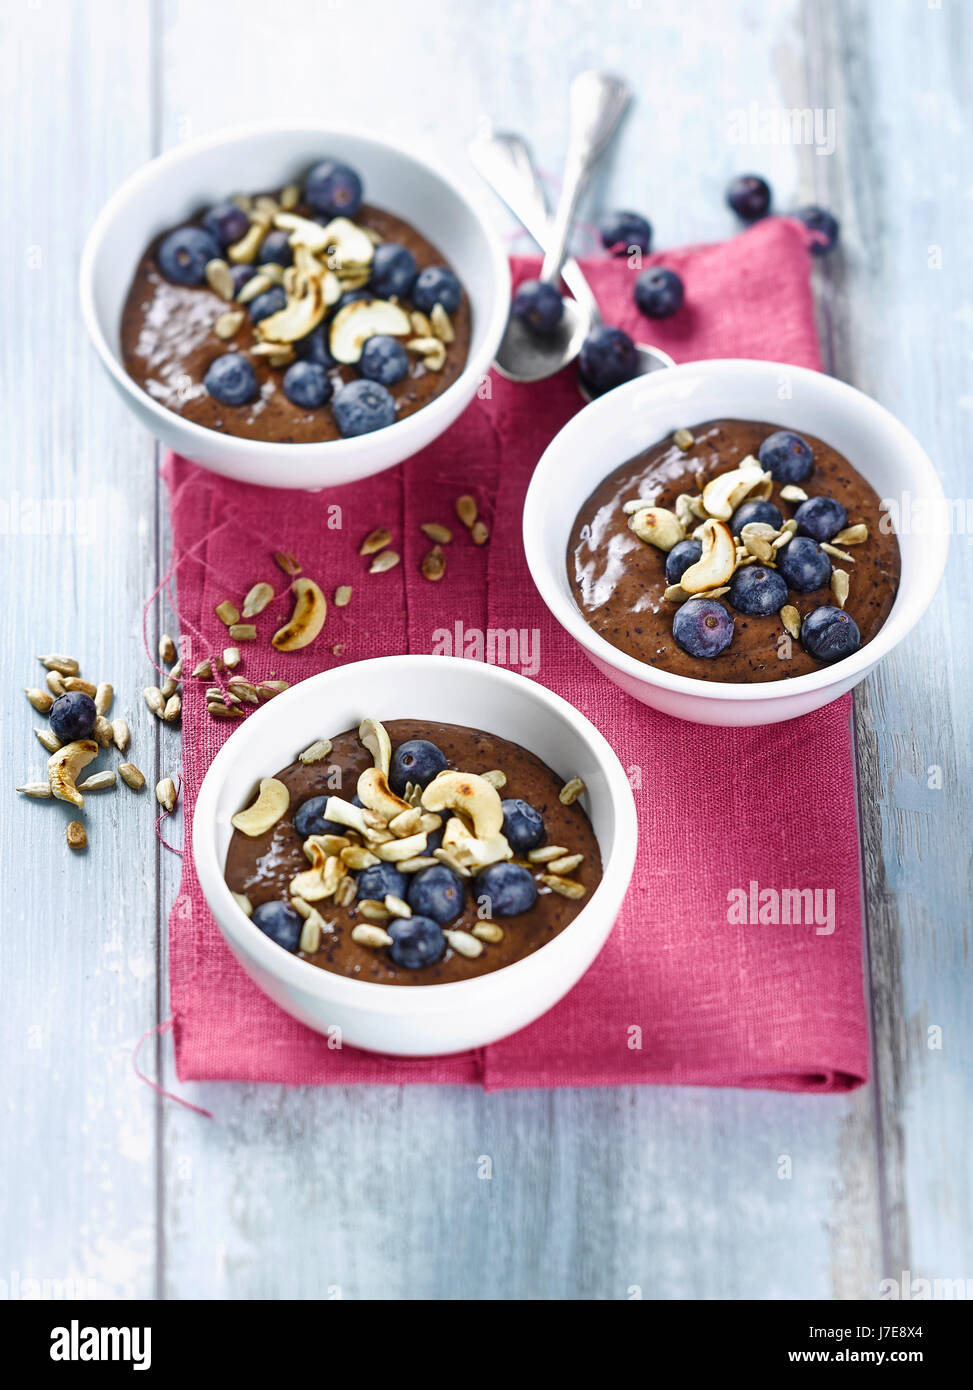 Blueberry smoothie bowl with plums Stock Photo